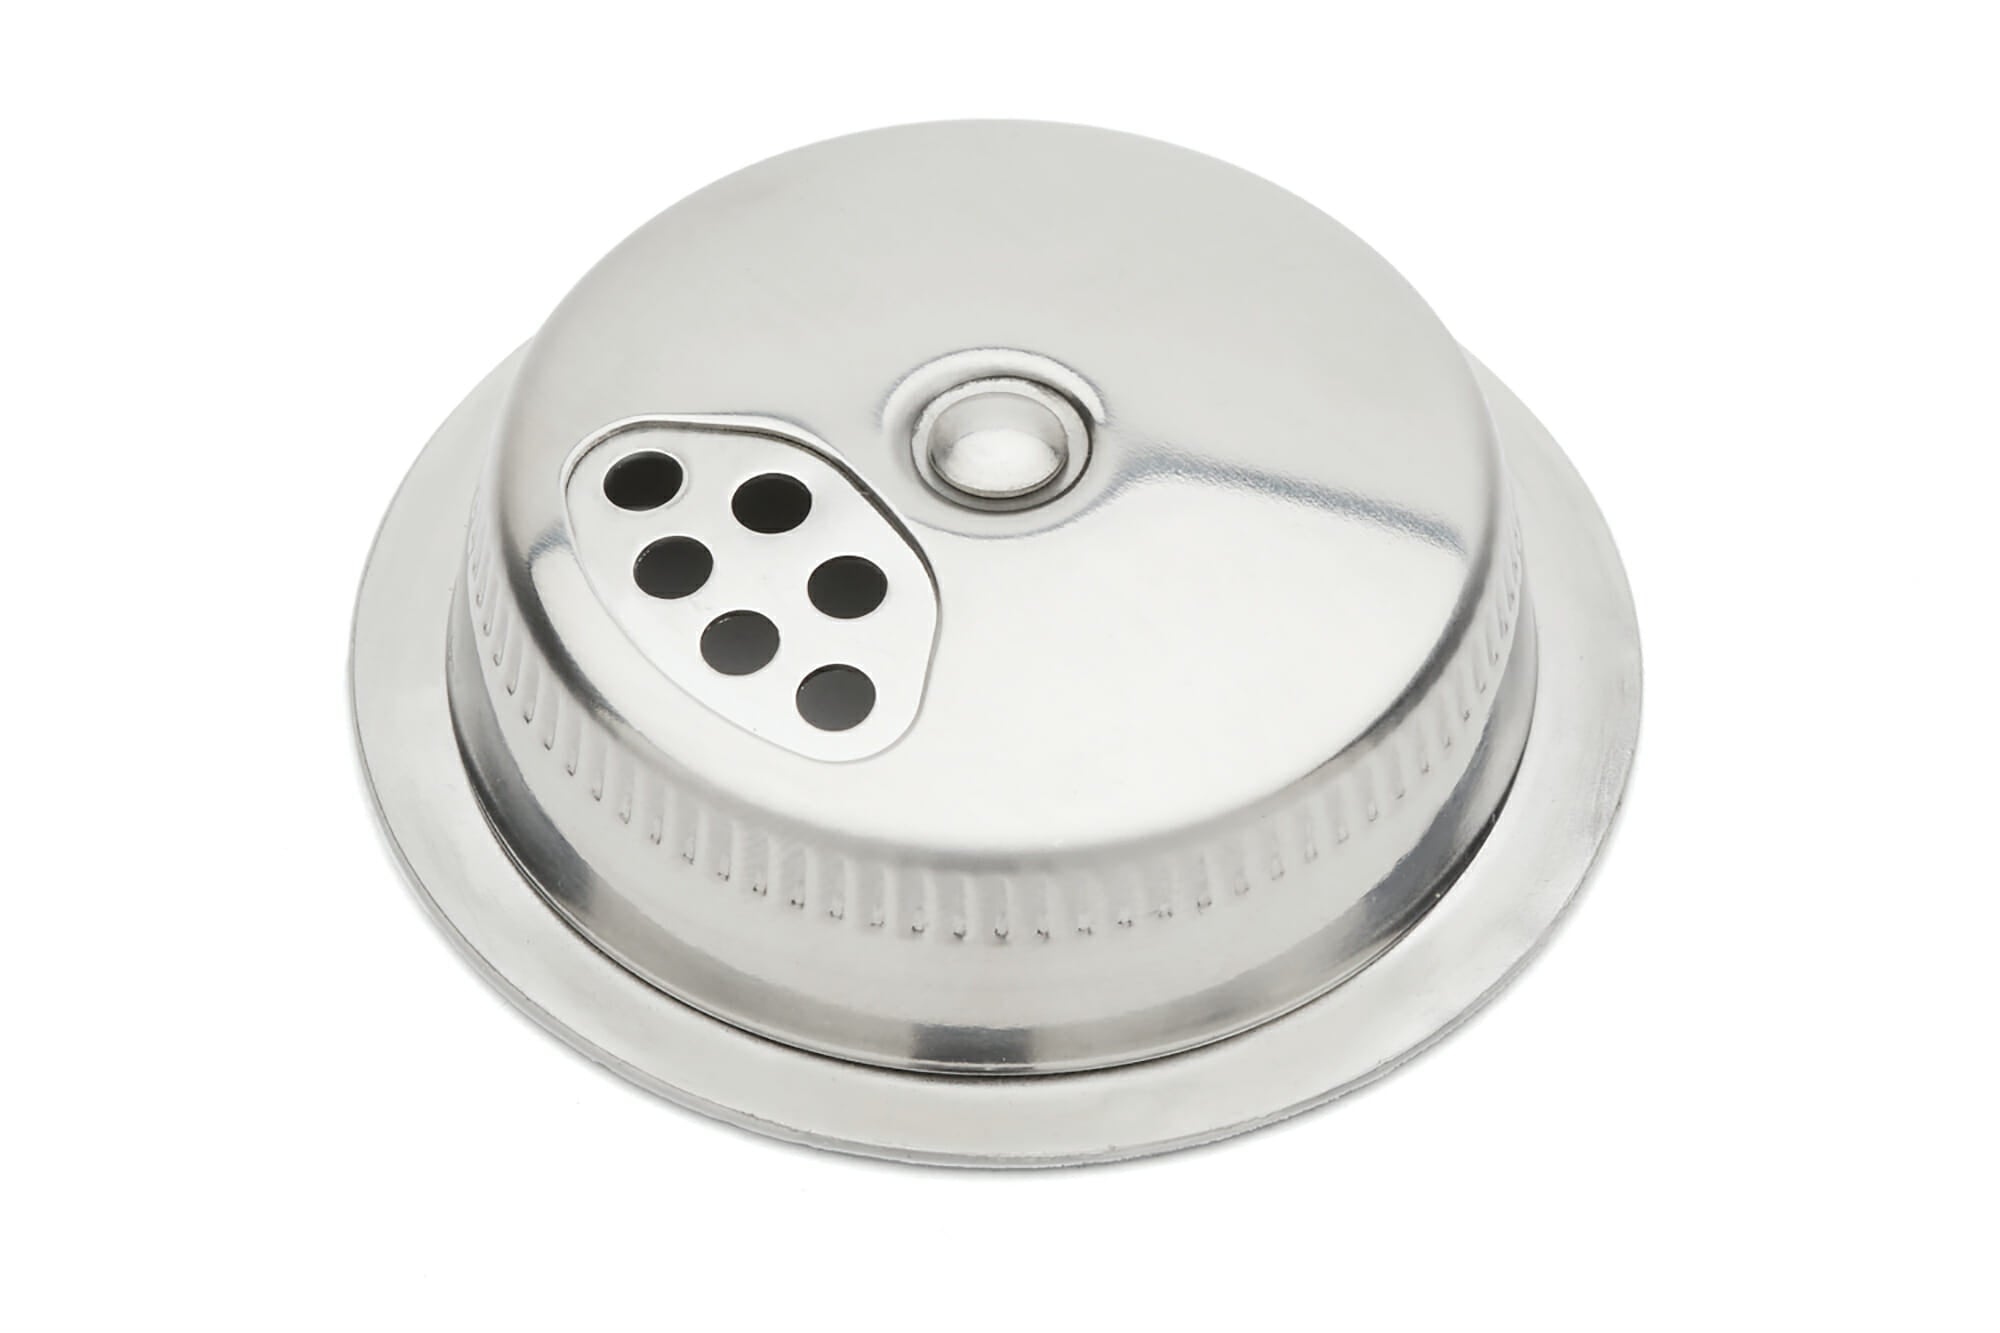 Stainless Steel Spice Lid